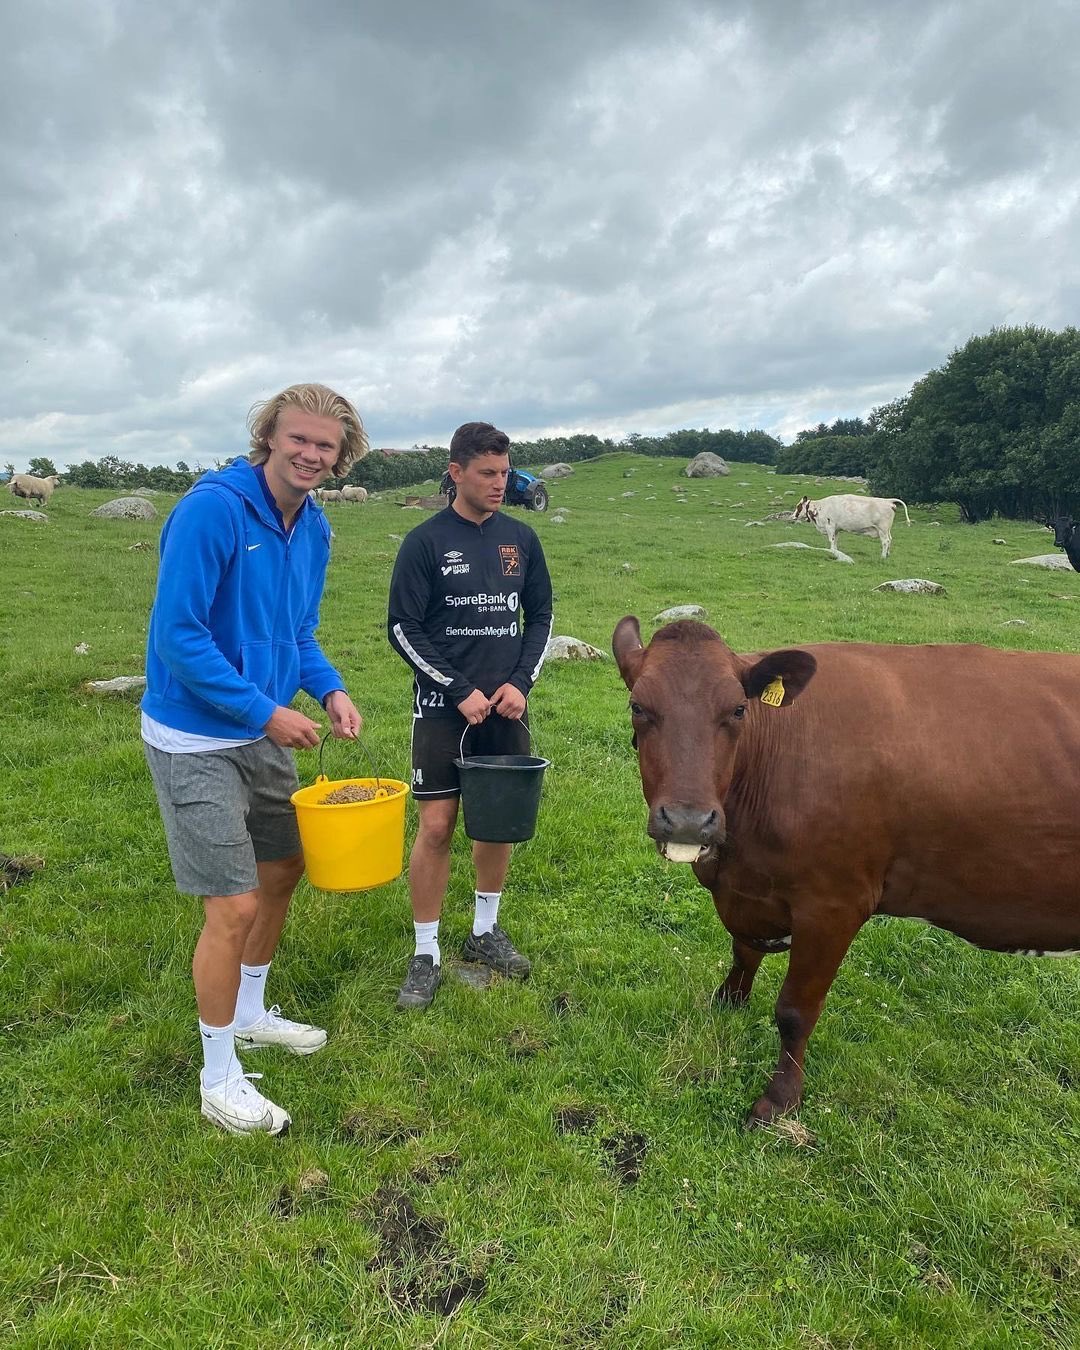 Football Tweet ⚽ on X: "Erling Haaland: "I try to relax as much as I can.  Being on a farm... driving a tractor, feeding my cows, that's my dream.  That's what I